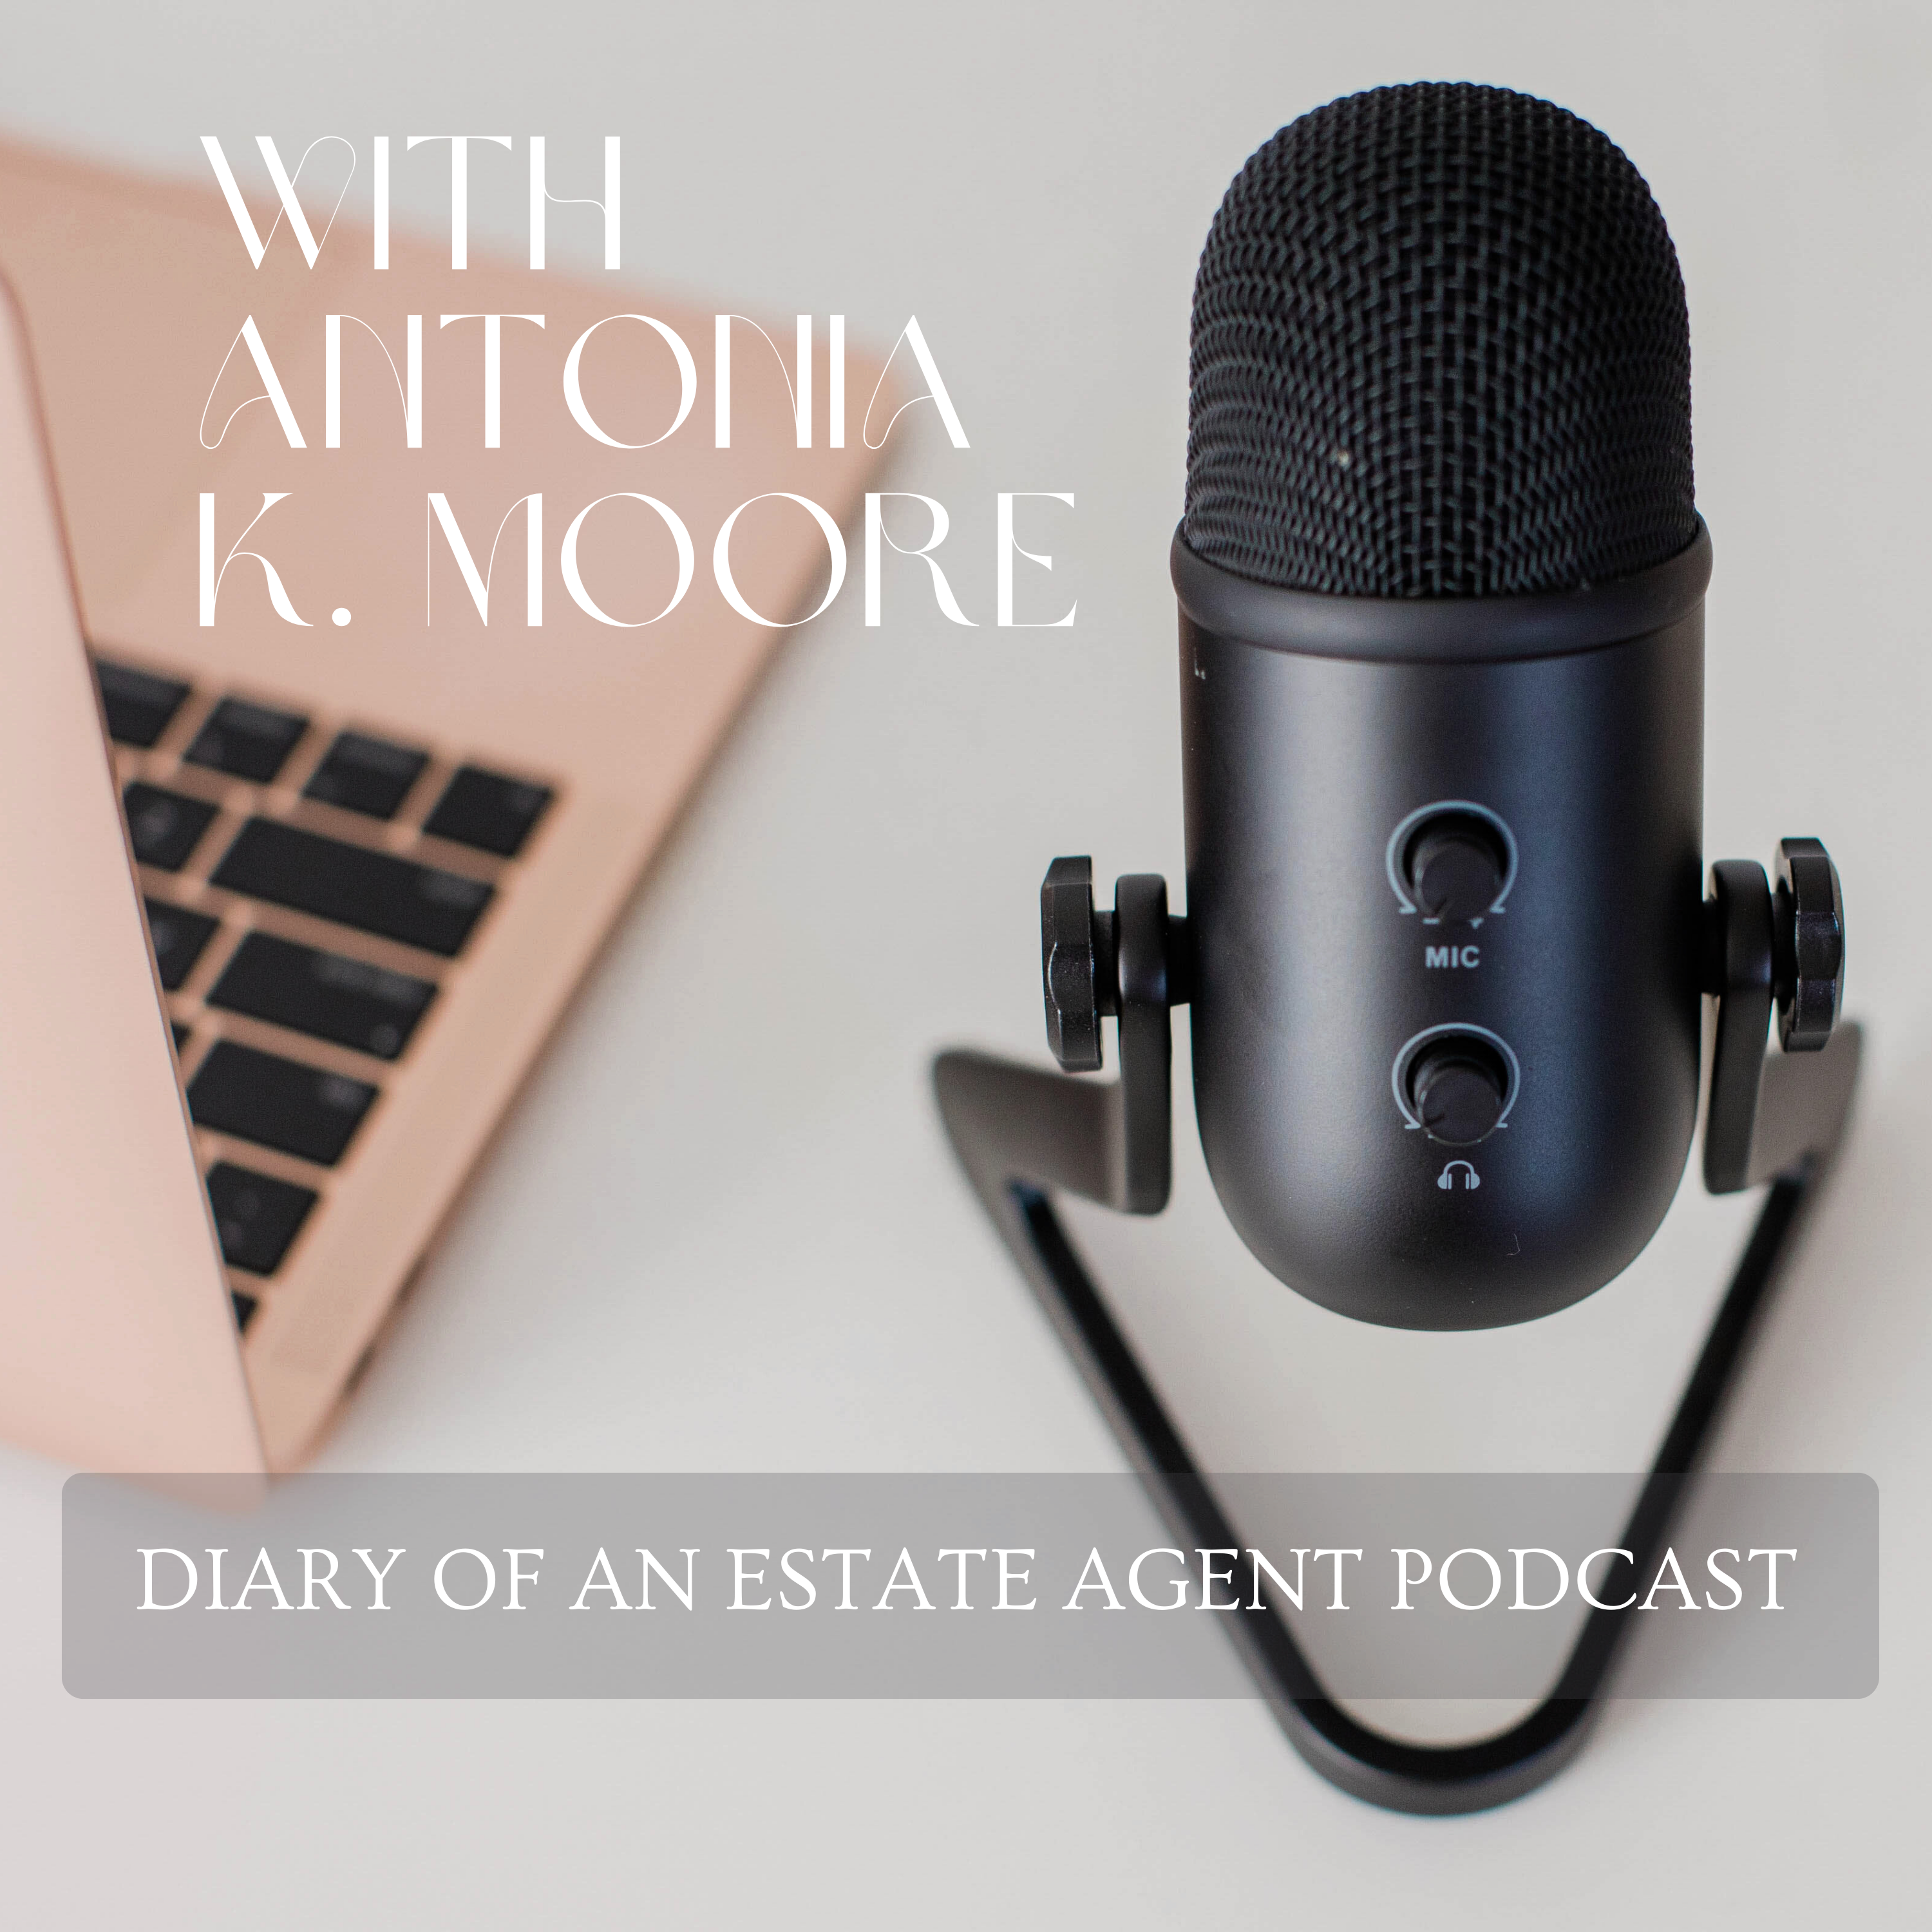 Diary Of An Estate Agent